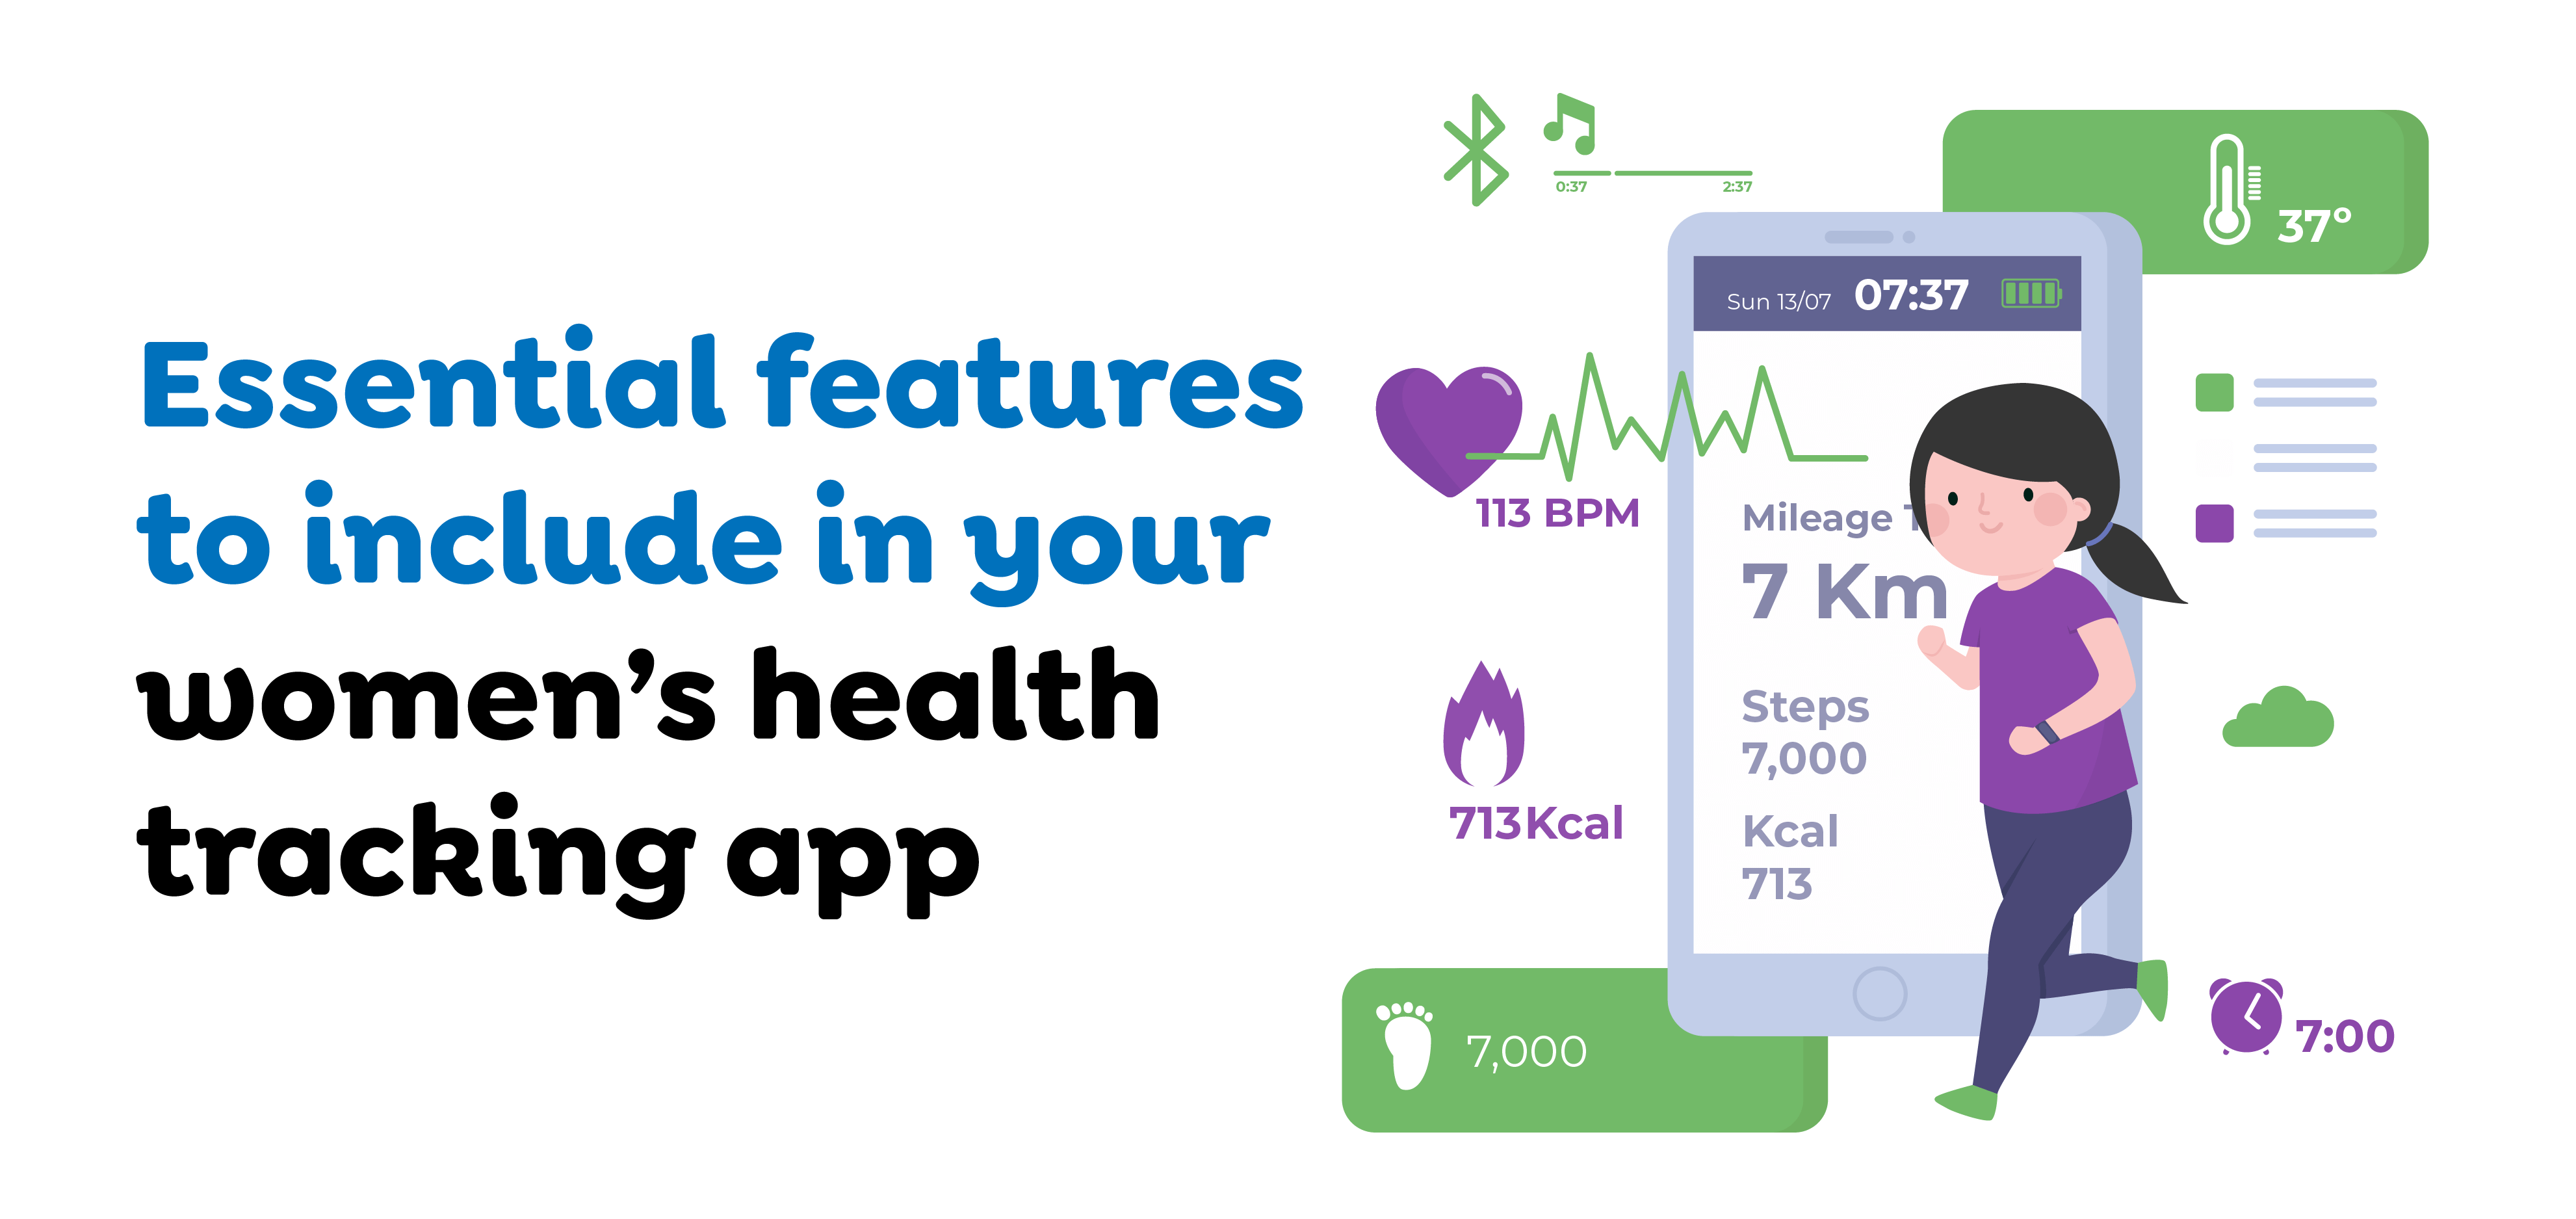 women’s health-tracking app features